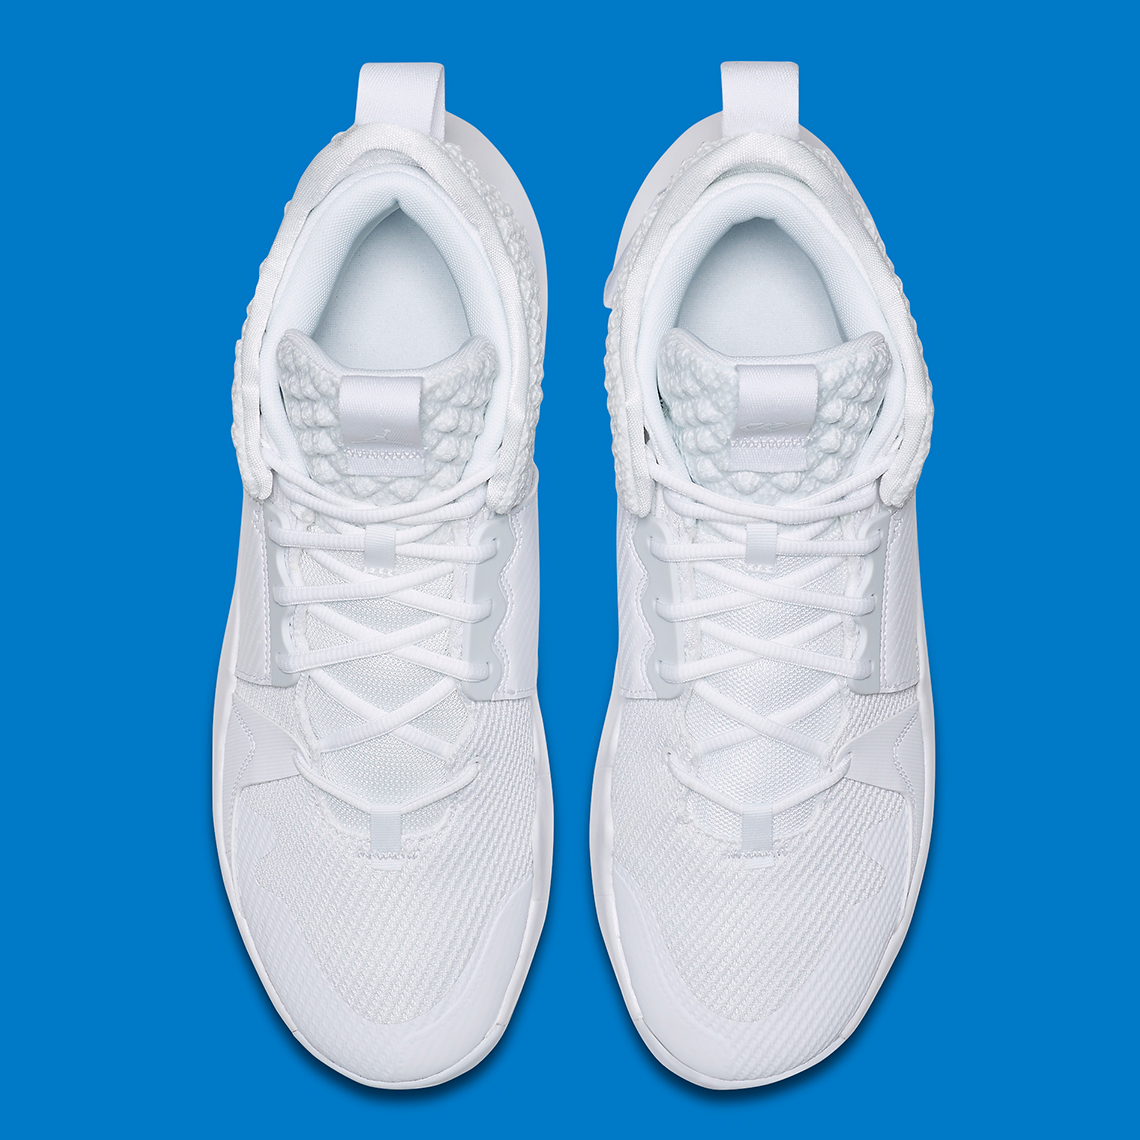 westbrook why not .2 white